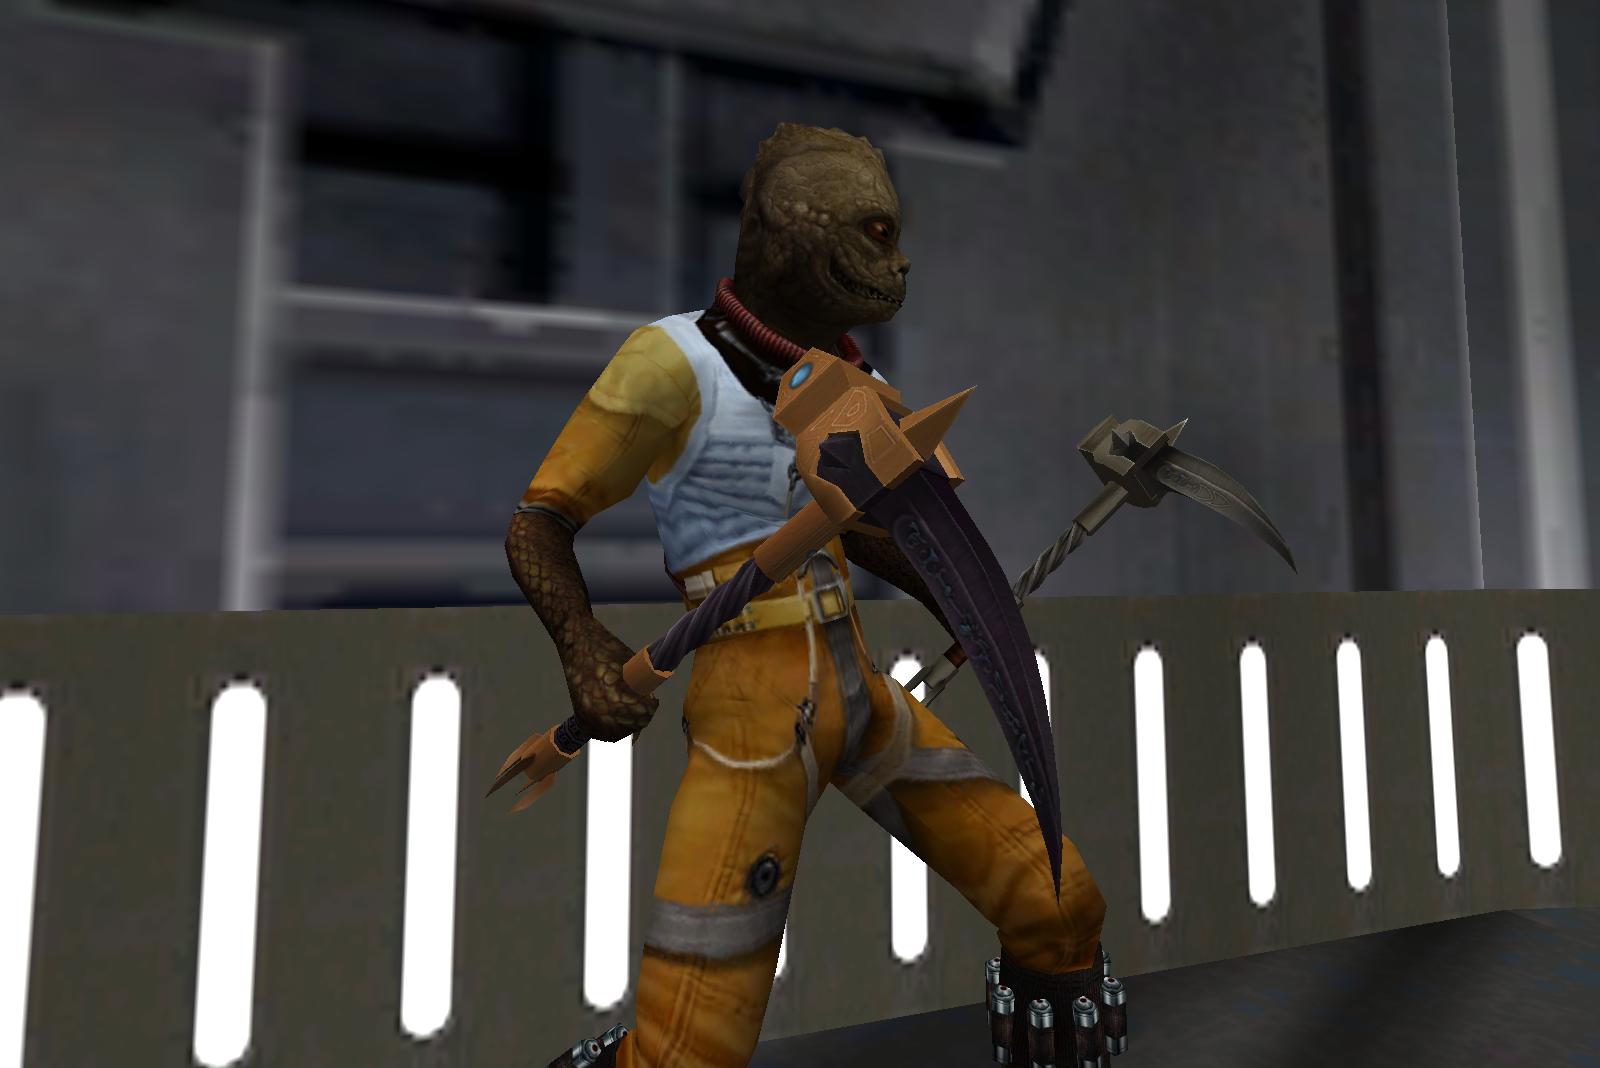 An in-game screenshot showing a character holding both variants of the pickhammer.